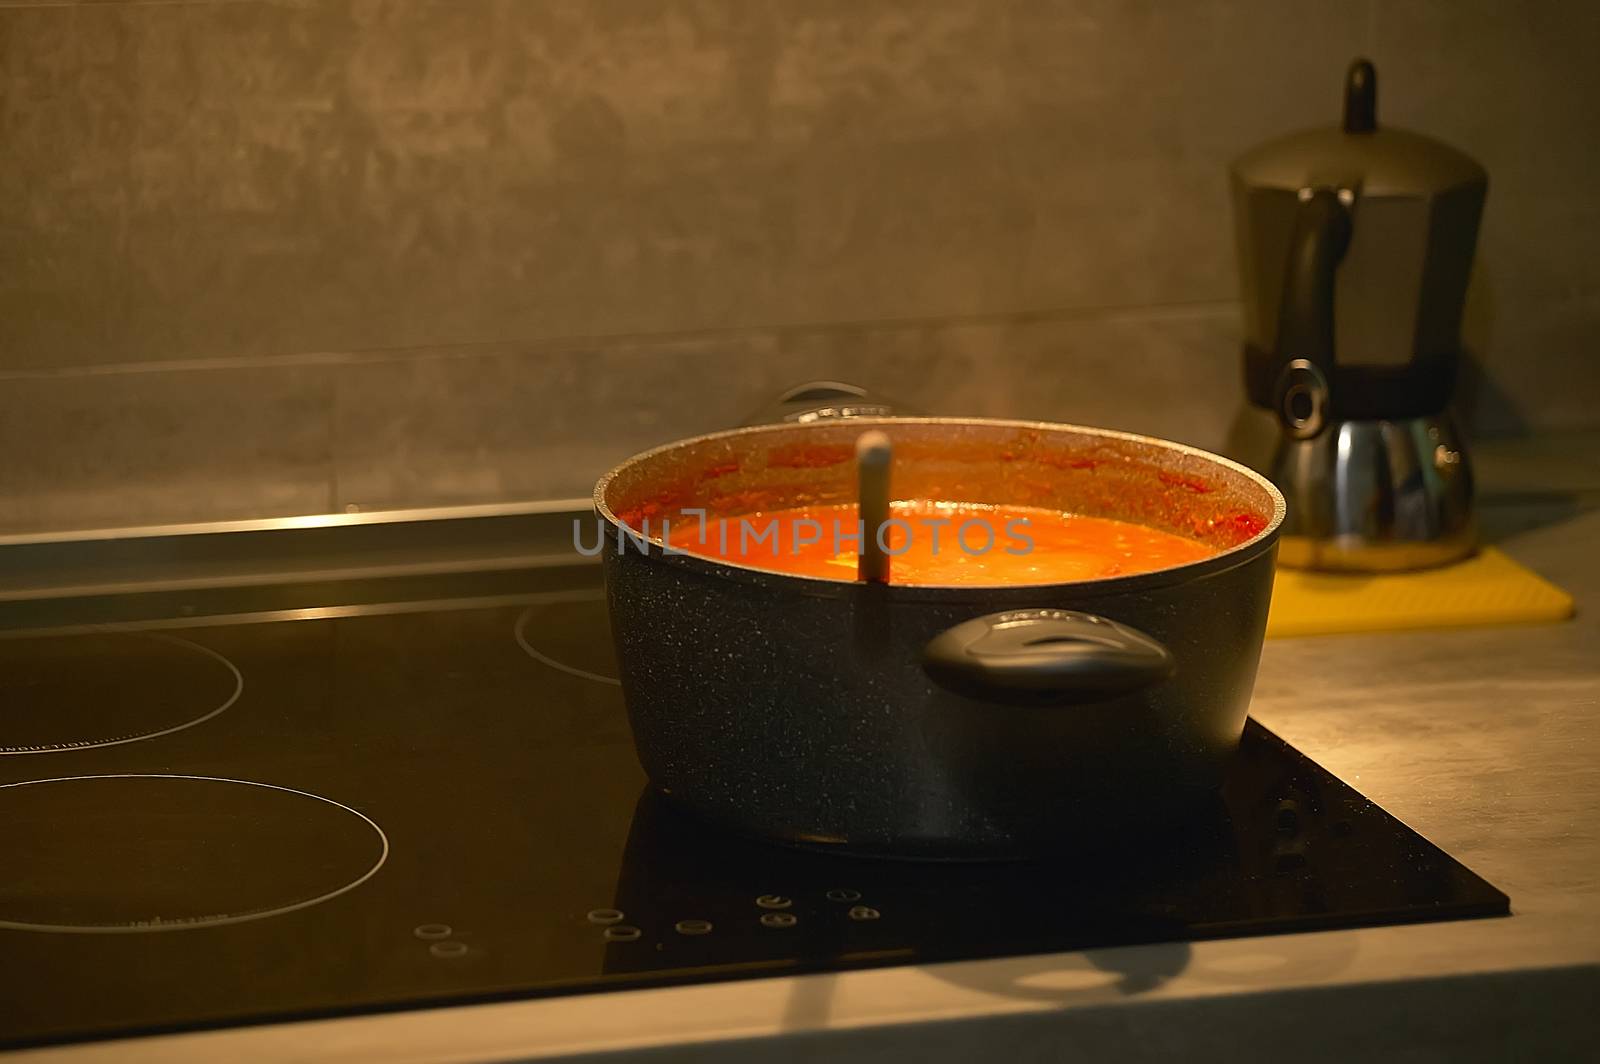 Saucepan that cooks in the kitchen above an induction cooker of the latest generation.